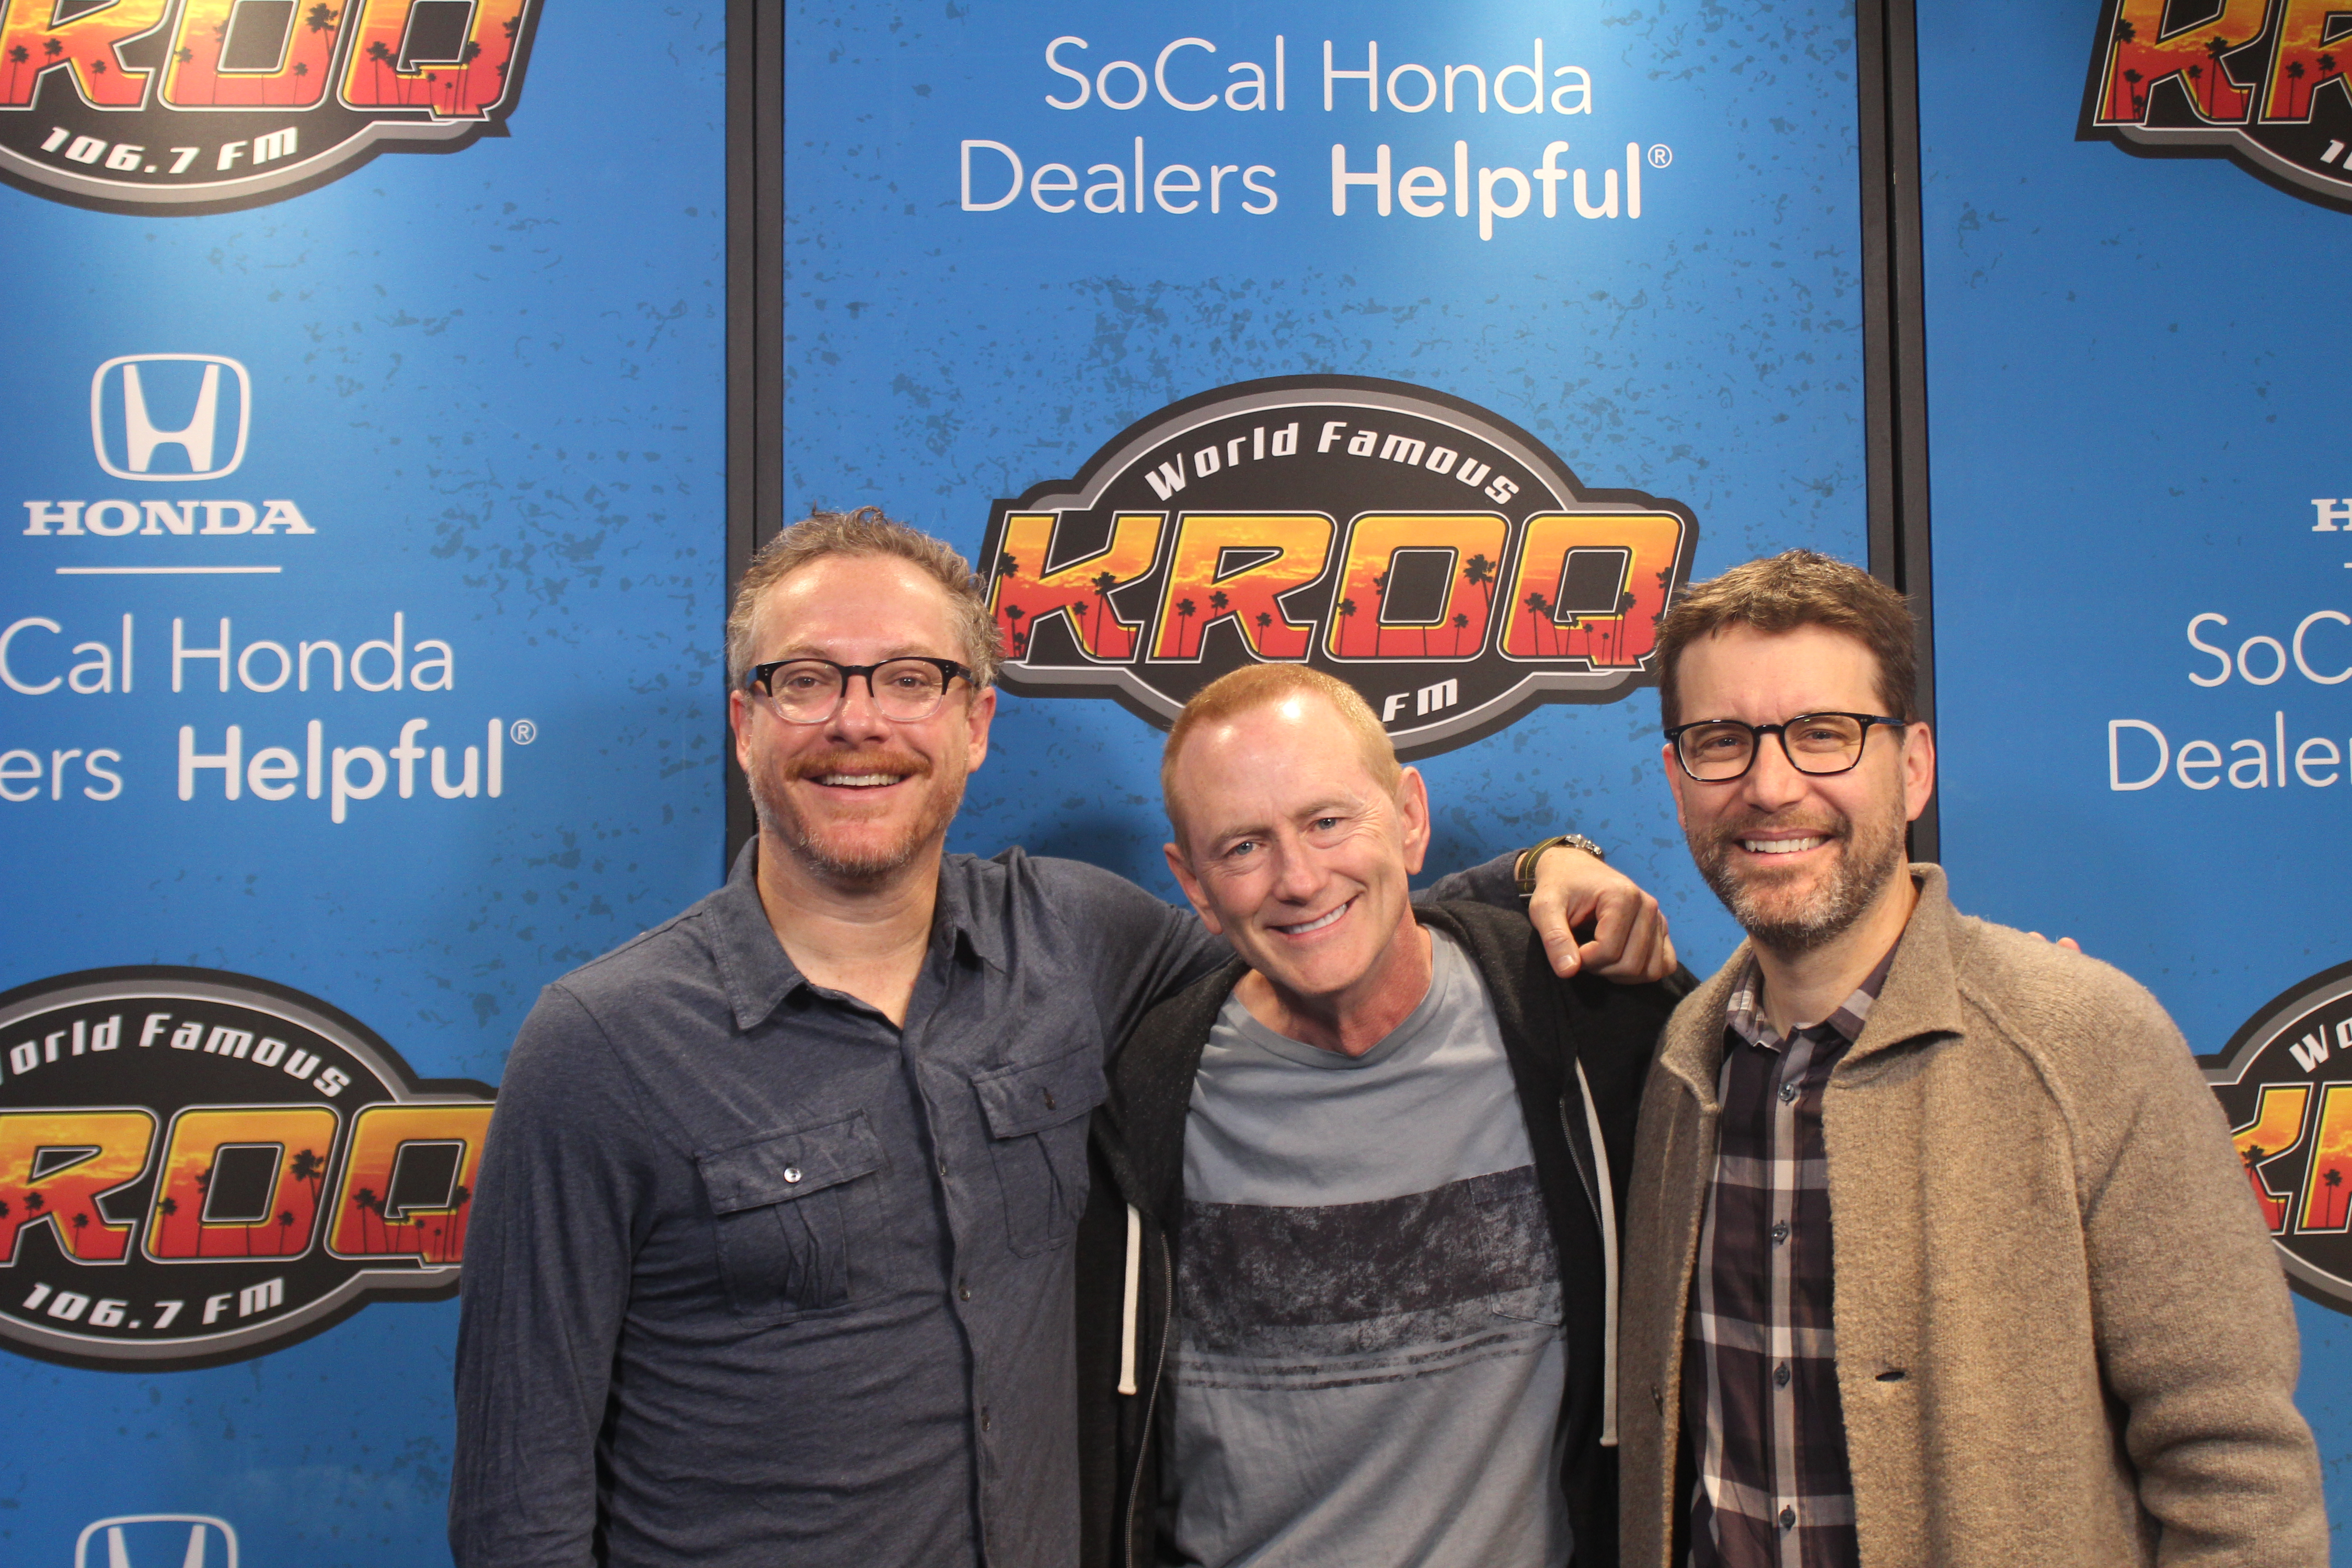 Thursday, May 17th with guests: Brad Williams, Dr. Drew and Deadpool Writers Rhett Resse and Paul Wernick